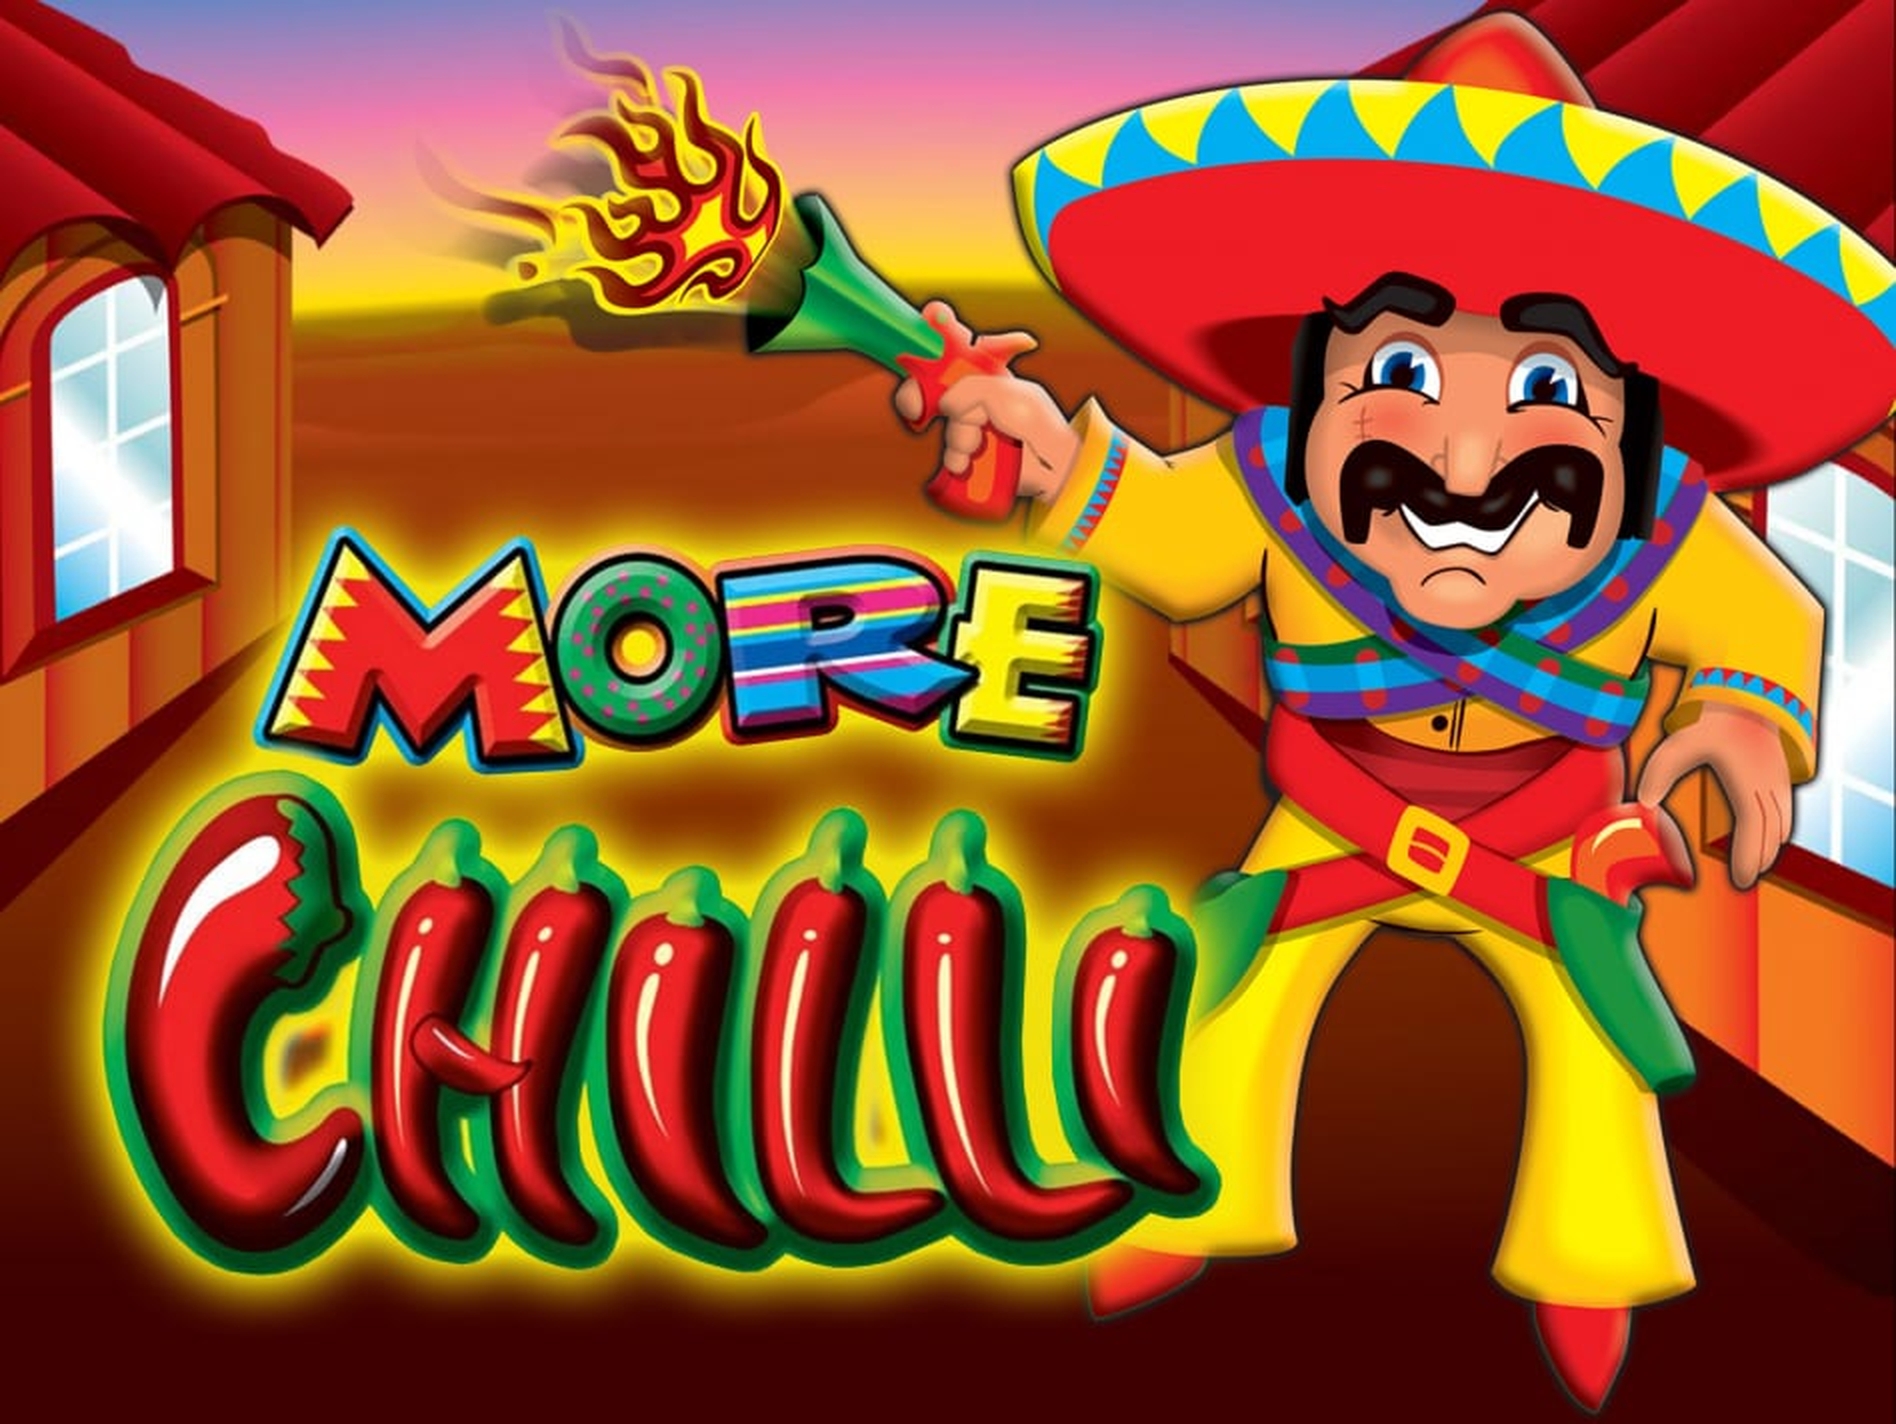 The More Chilli Online Slot Demo Game by Aristocrat